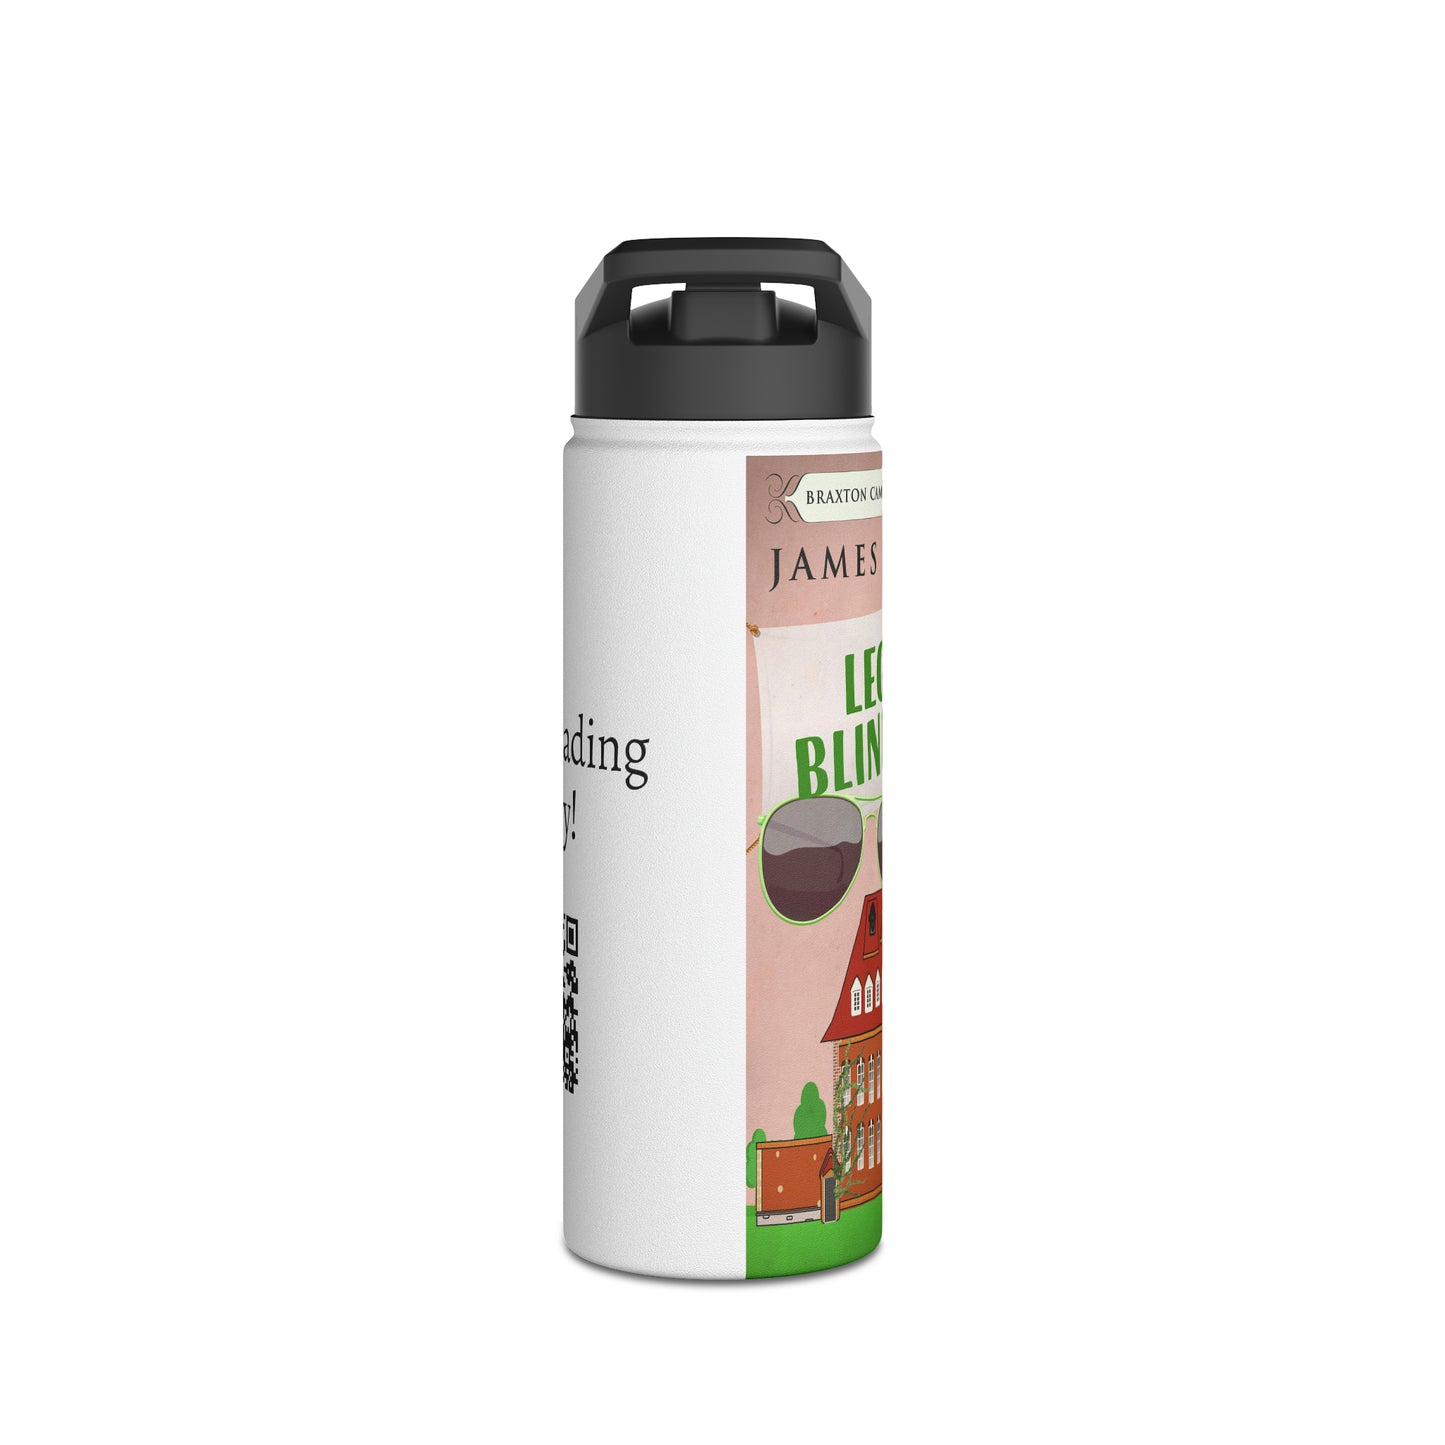 Legally Blind Luck - Stainless Steel Water Bottle